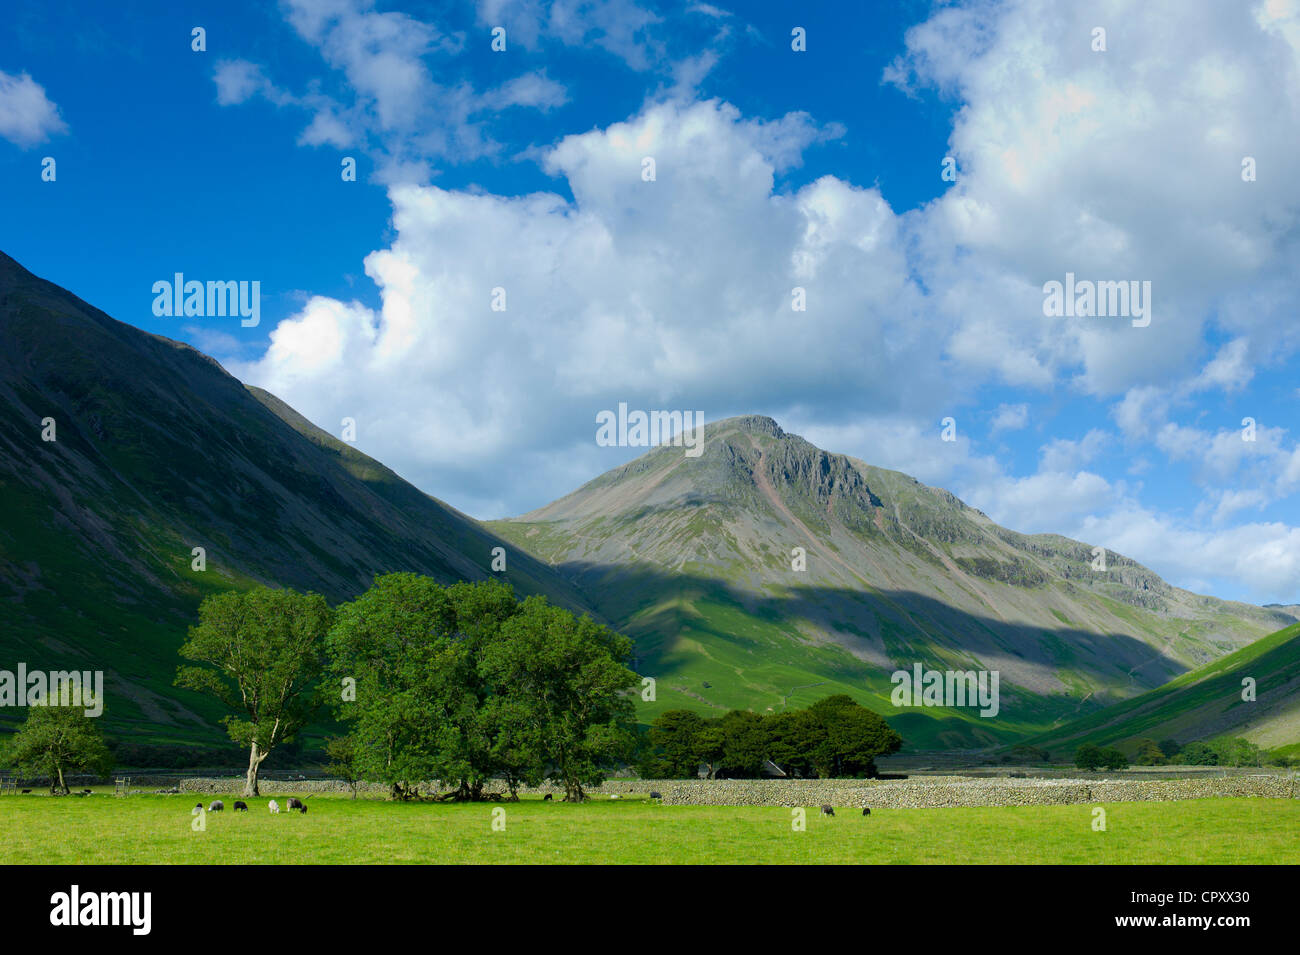 Wasdale Fell and Great Gable by Wastwater in the shadow of Sca Fell Pike in the Lake District National Park, Cumbria, UK Stock Photo